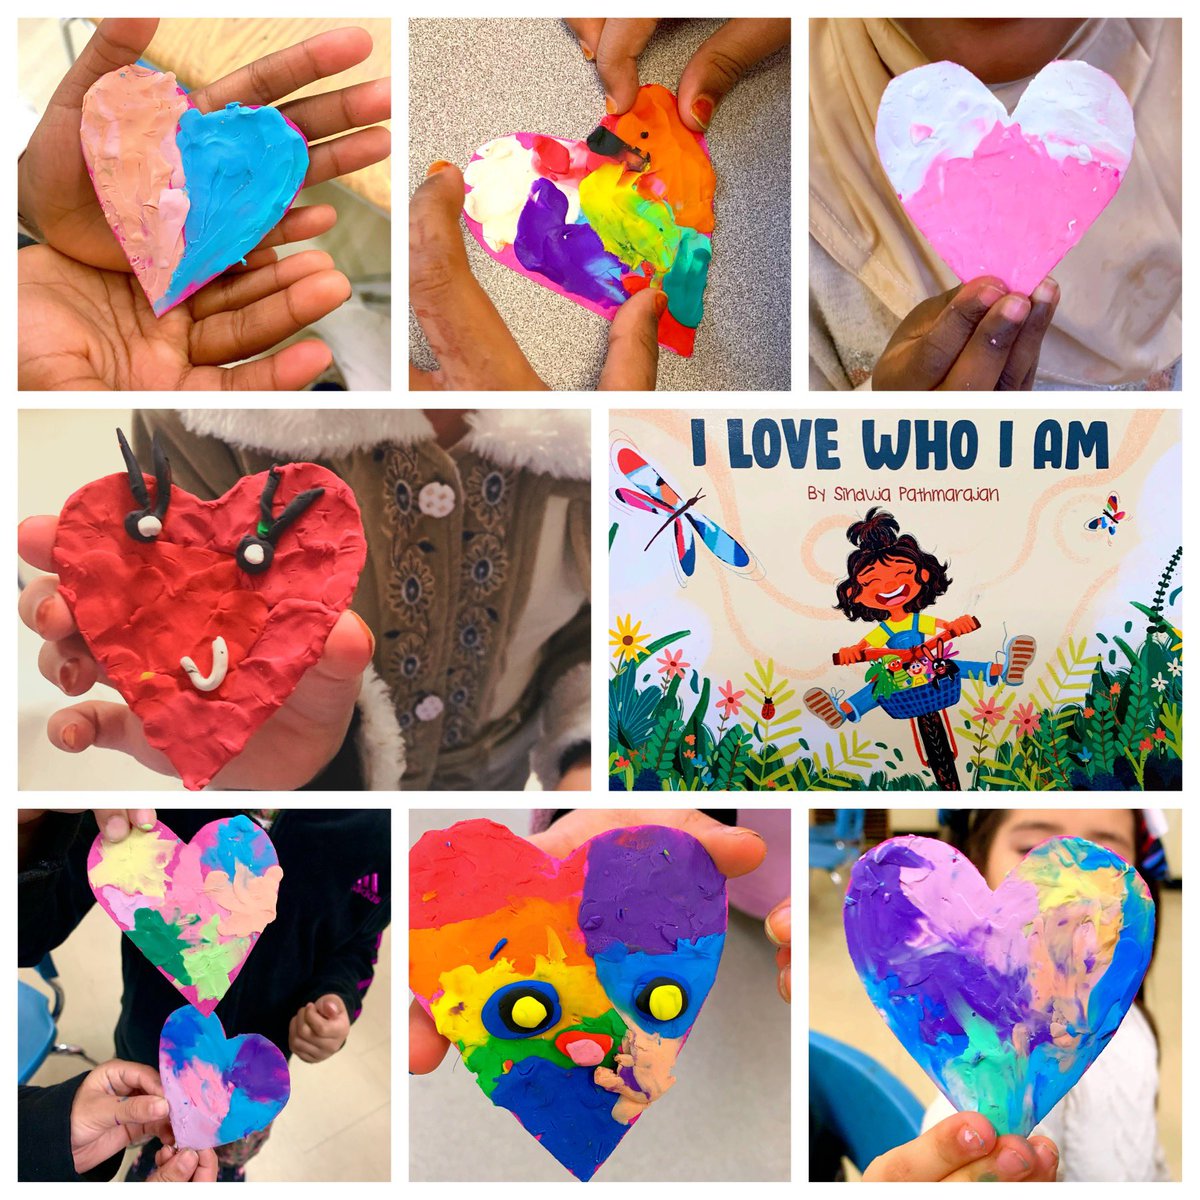 Learning about Tamil-Canadian author/educator Sinduja Pathmarajan, discussing what we love about ourselves & making plasticine hearts in Kindergarten
#tamilheritagemonth